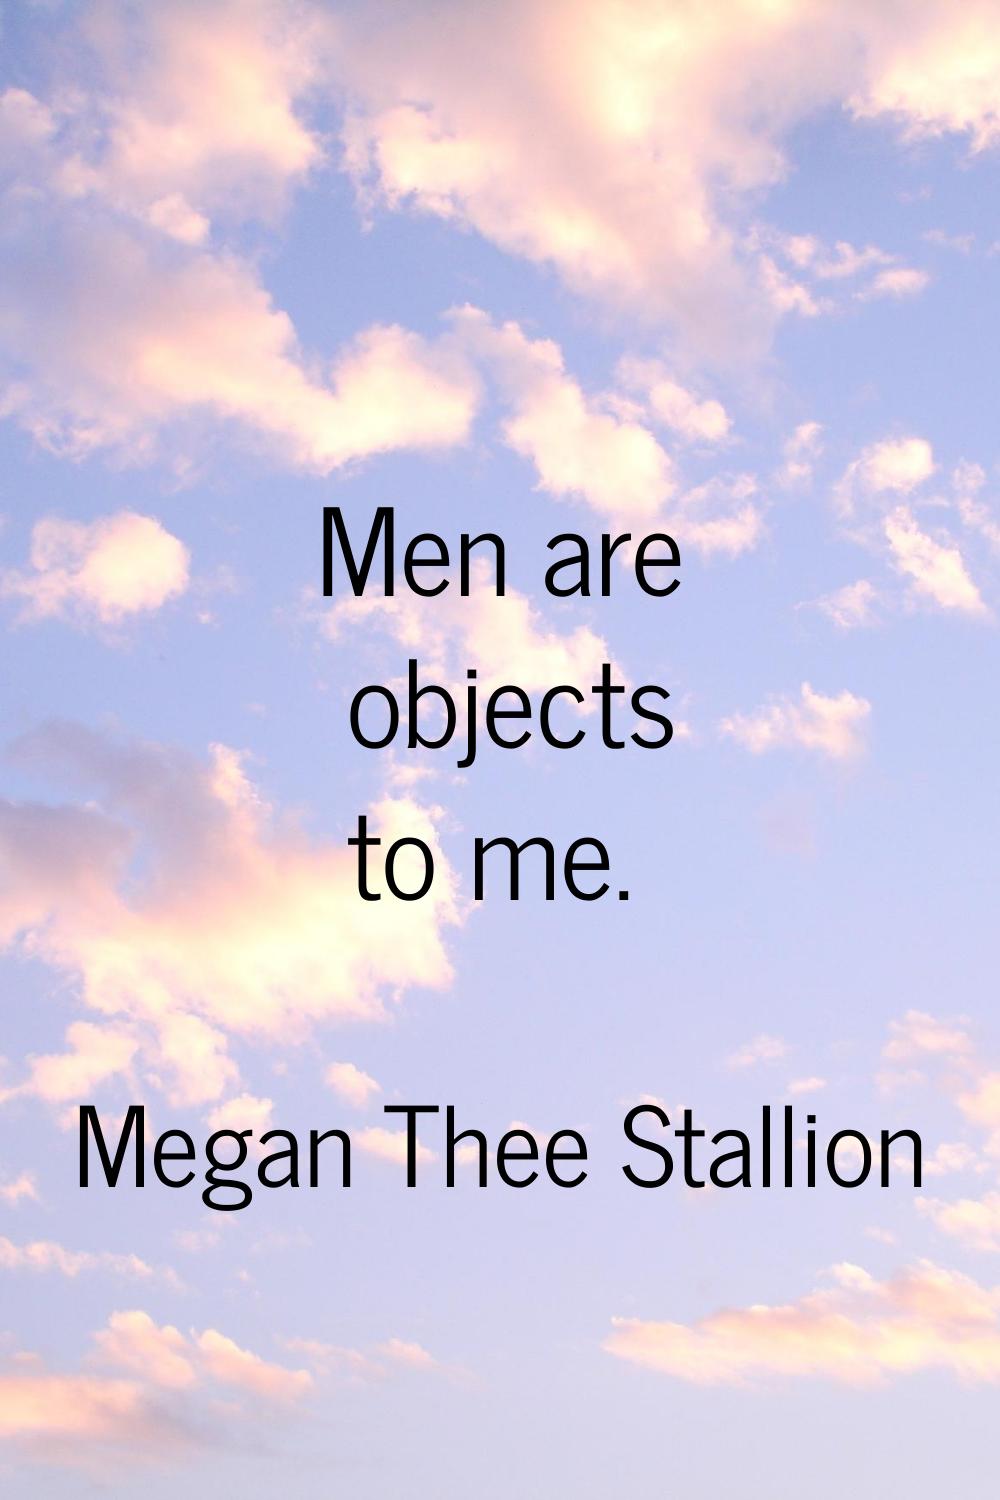 Men are objects to me.